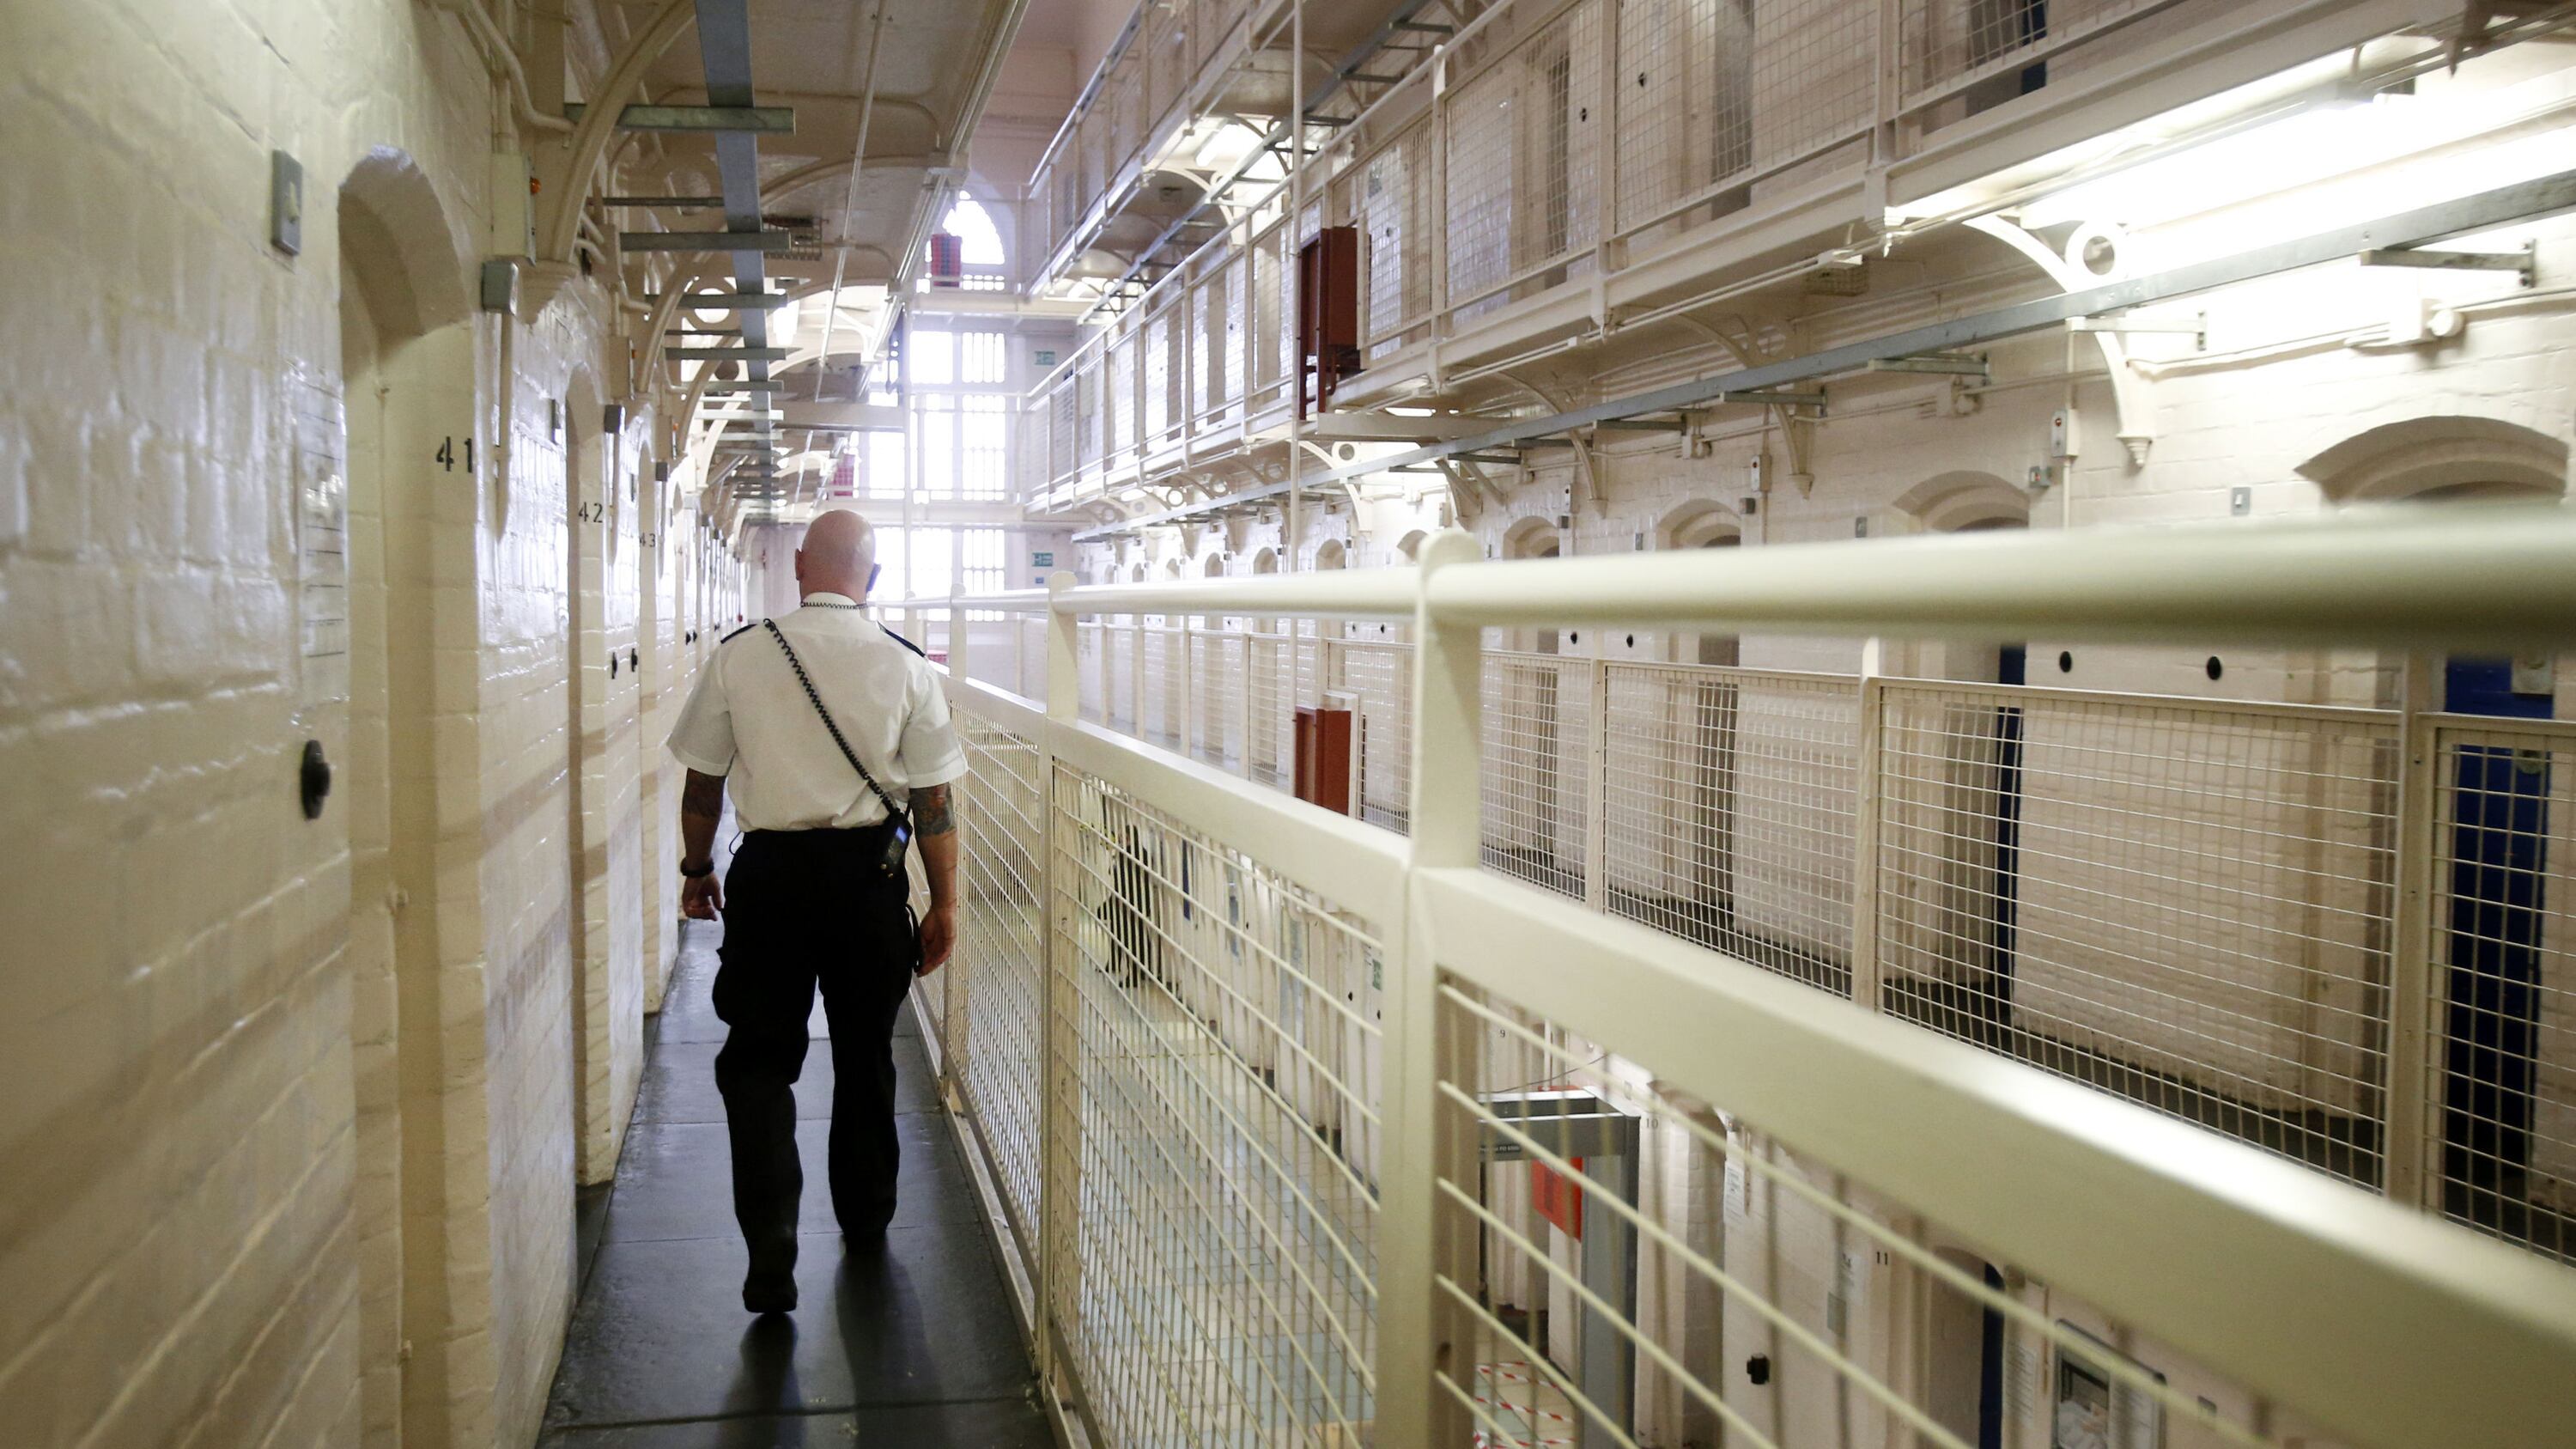 The Government is set to expand plans to release some inmates from jail up to 70 days early to free up prison cells